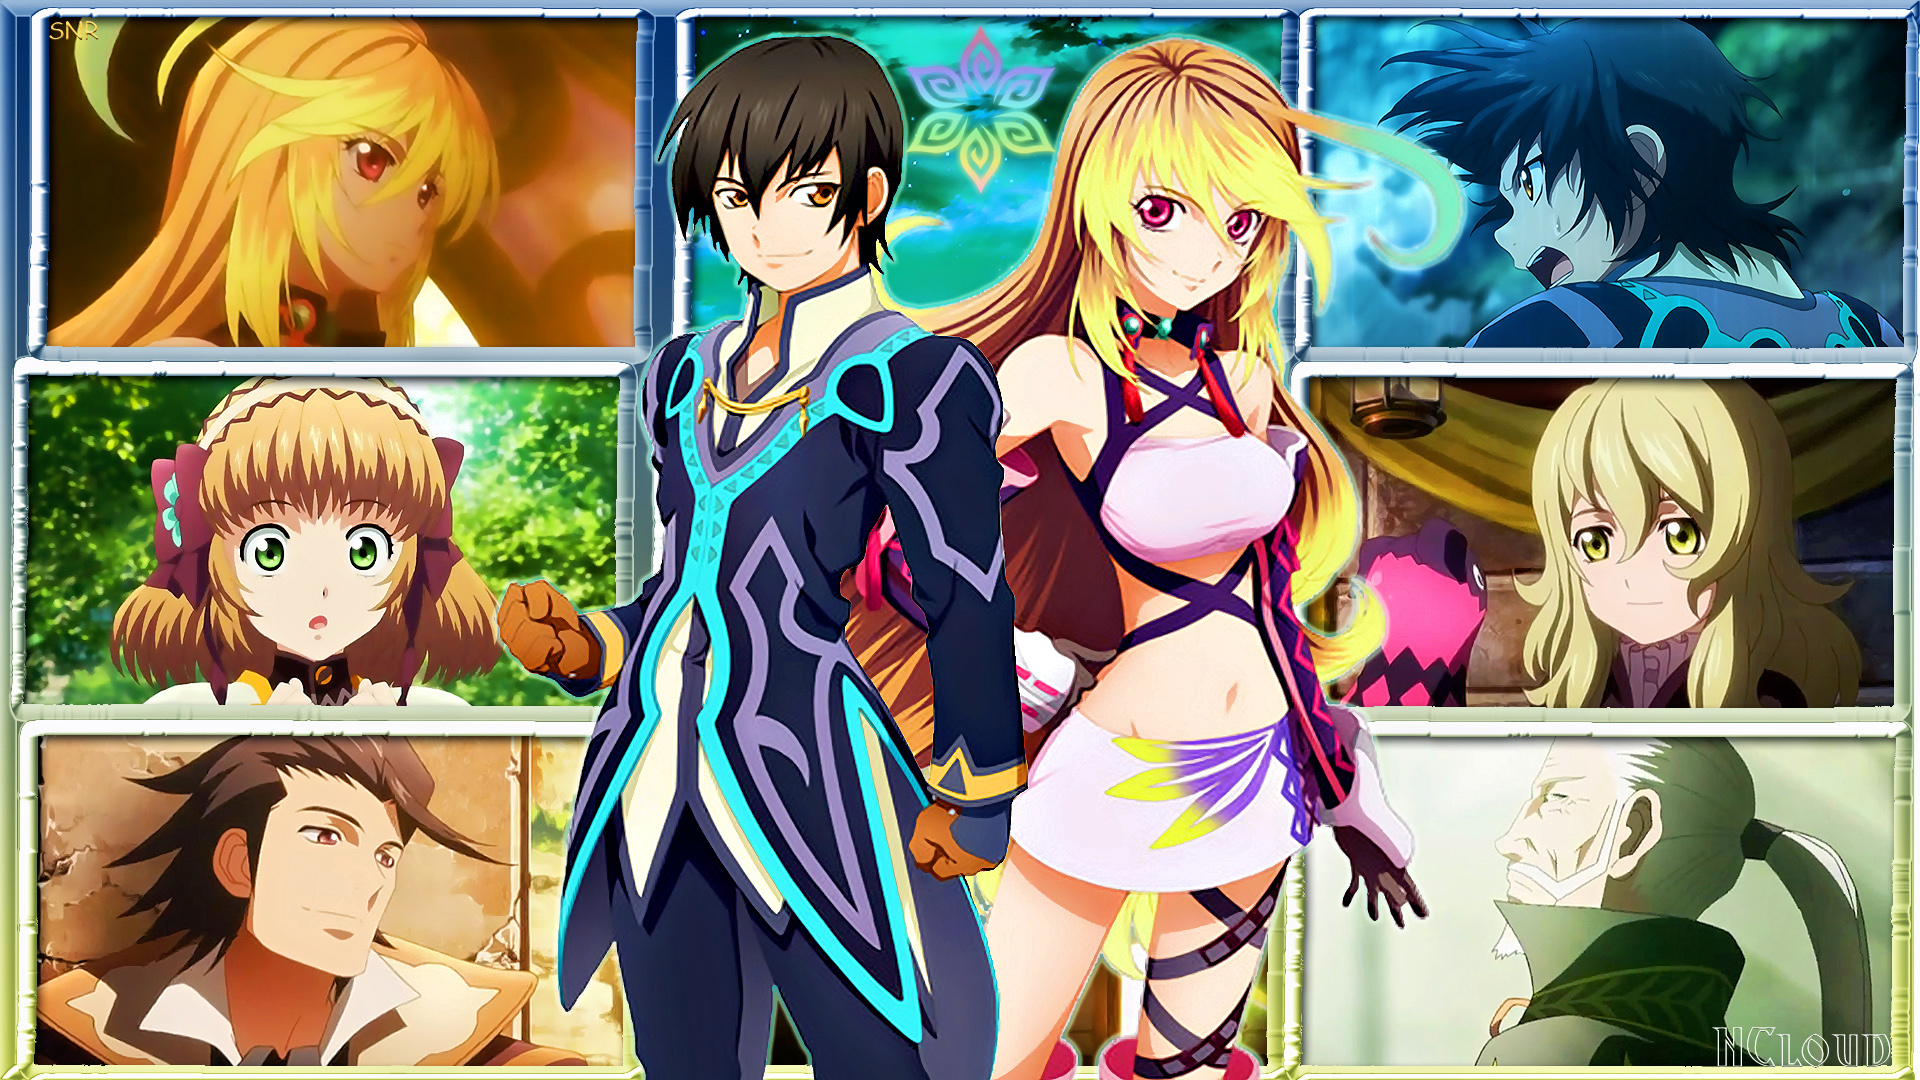 Games Movies Music Anime My Tales Of Xillia HD Ps3 Wallpaper